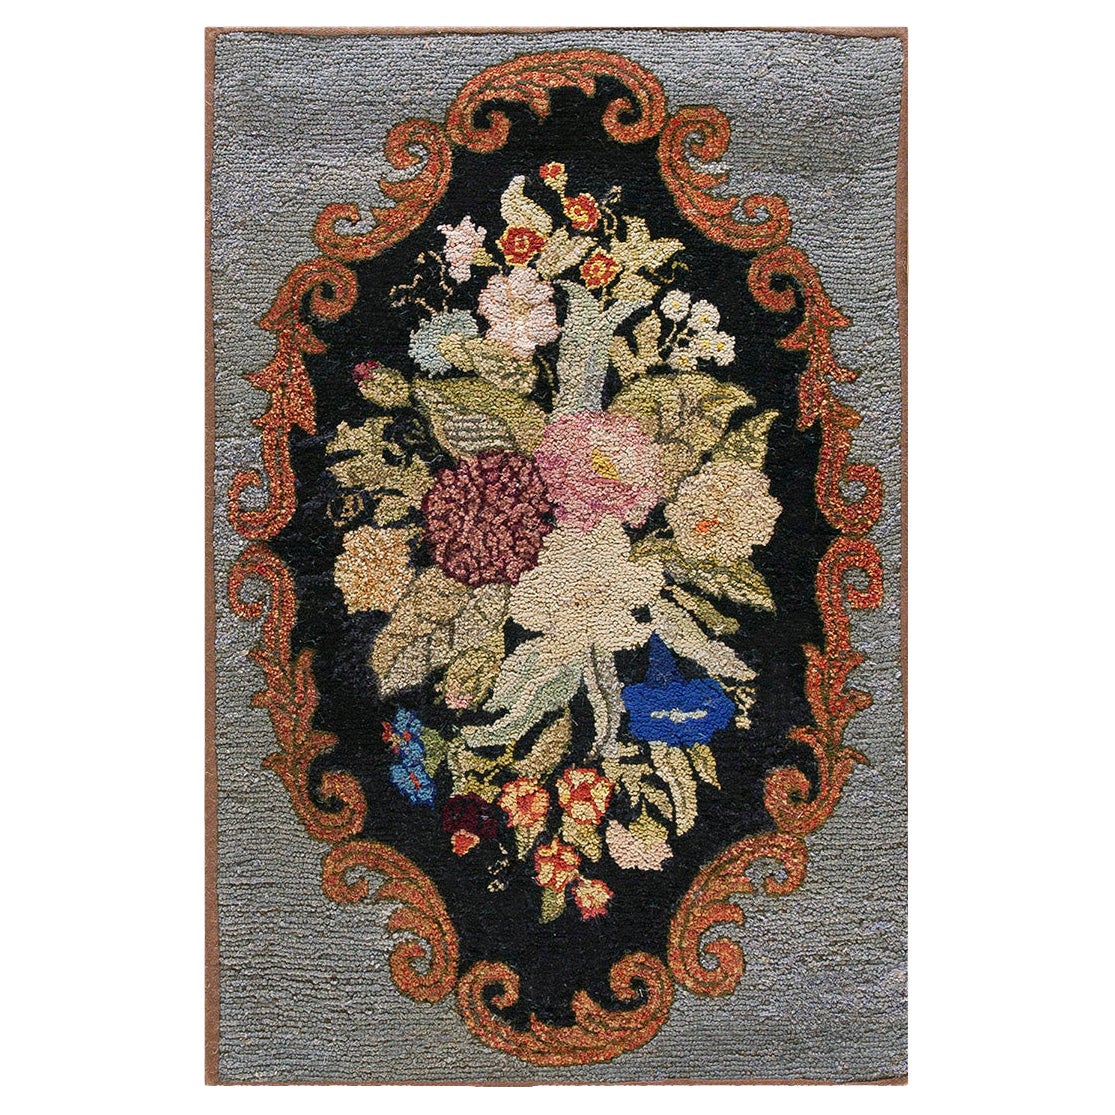 Early 20th Century American Hooked Rug ( 2' x 3' - 62 x 92 )